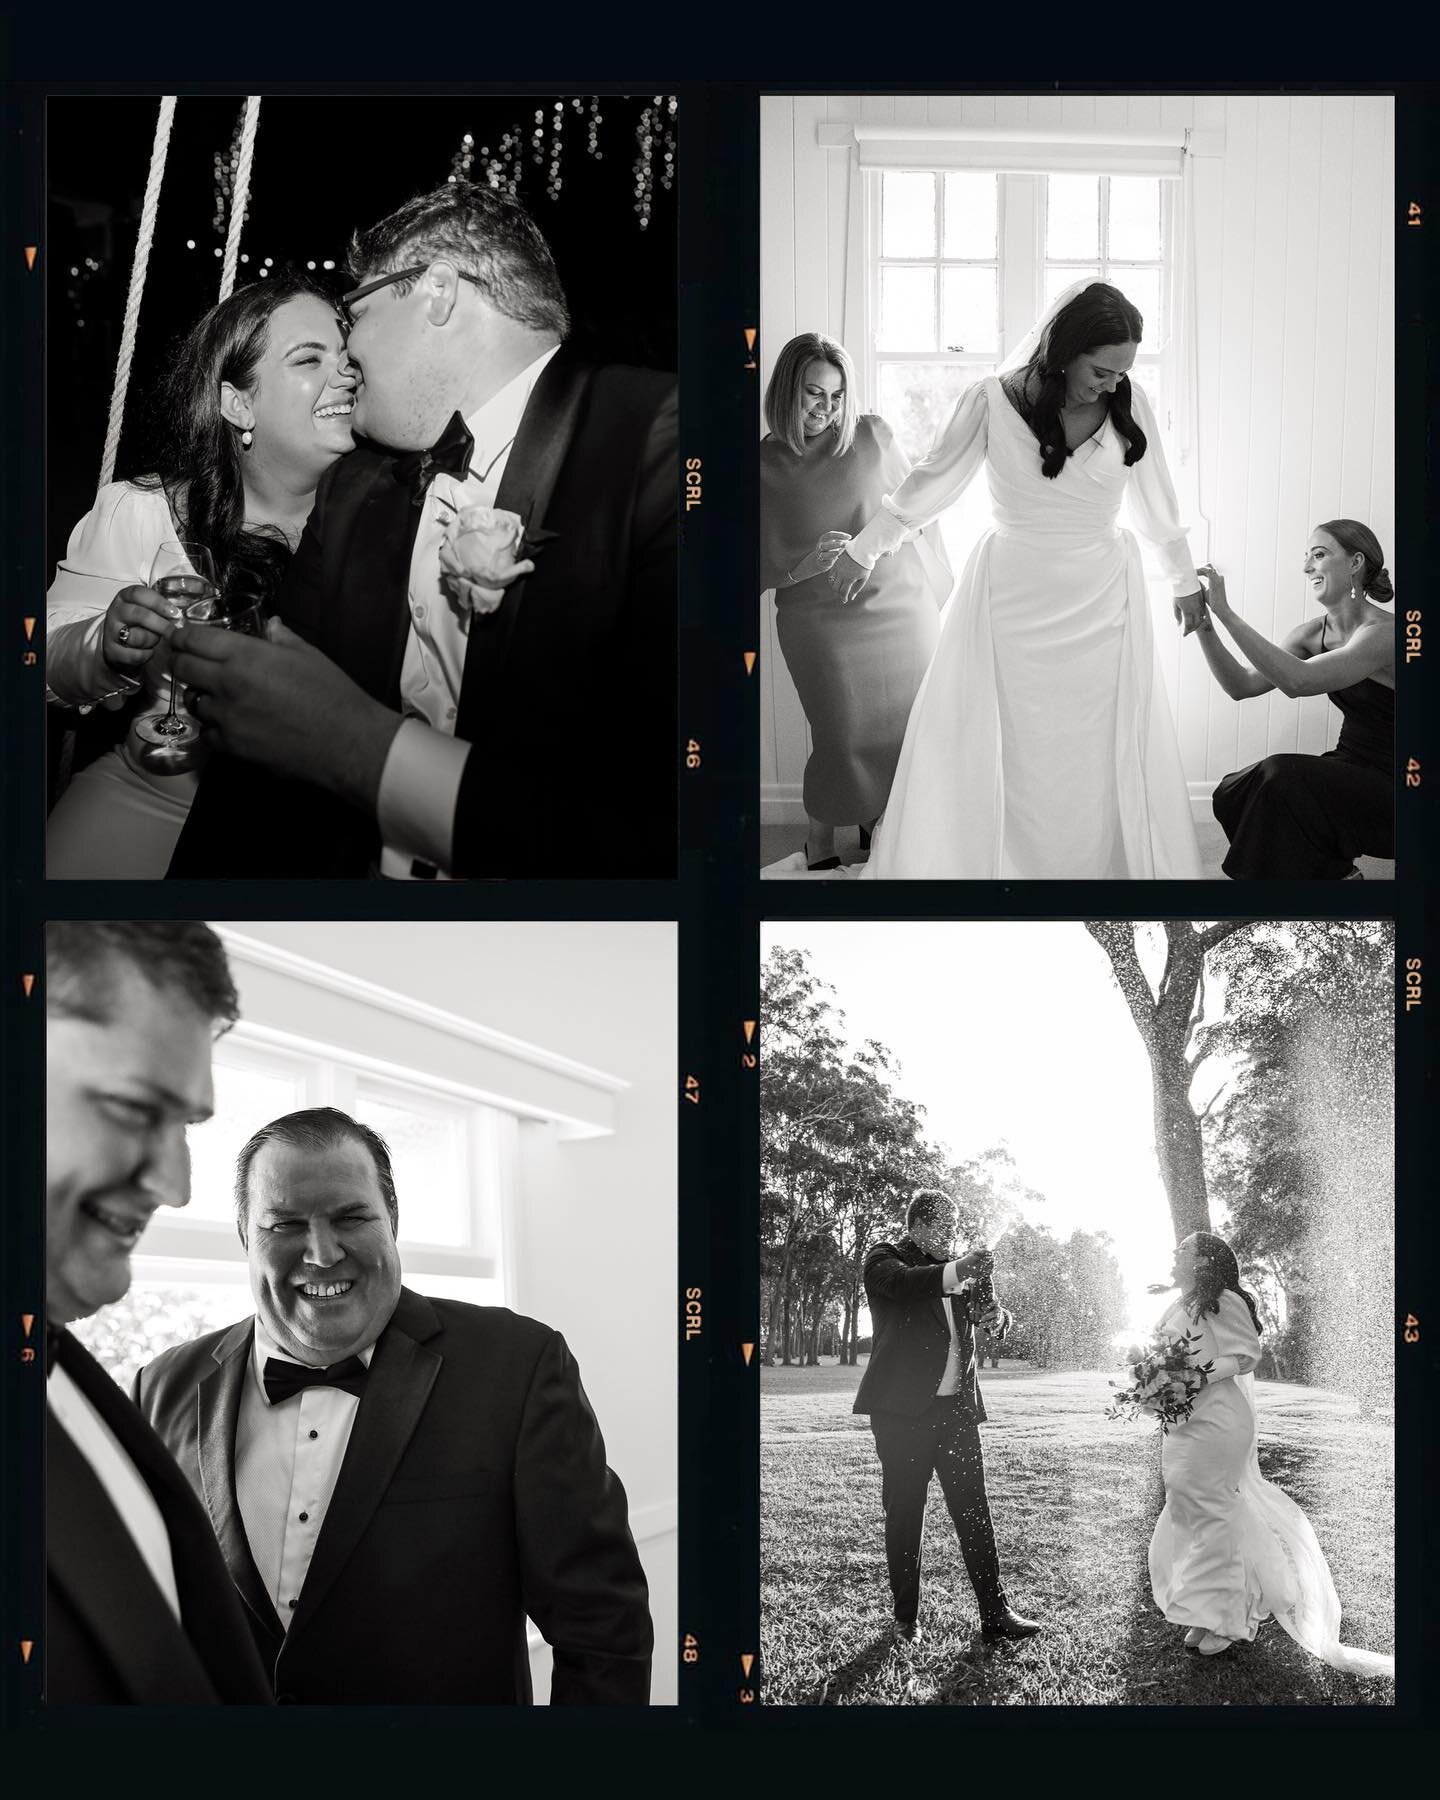 Some of my favourite B&amp;W moments from the insanely beautiful wedding of Ange &amp; Charles 💚 #asithappens